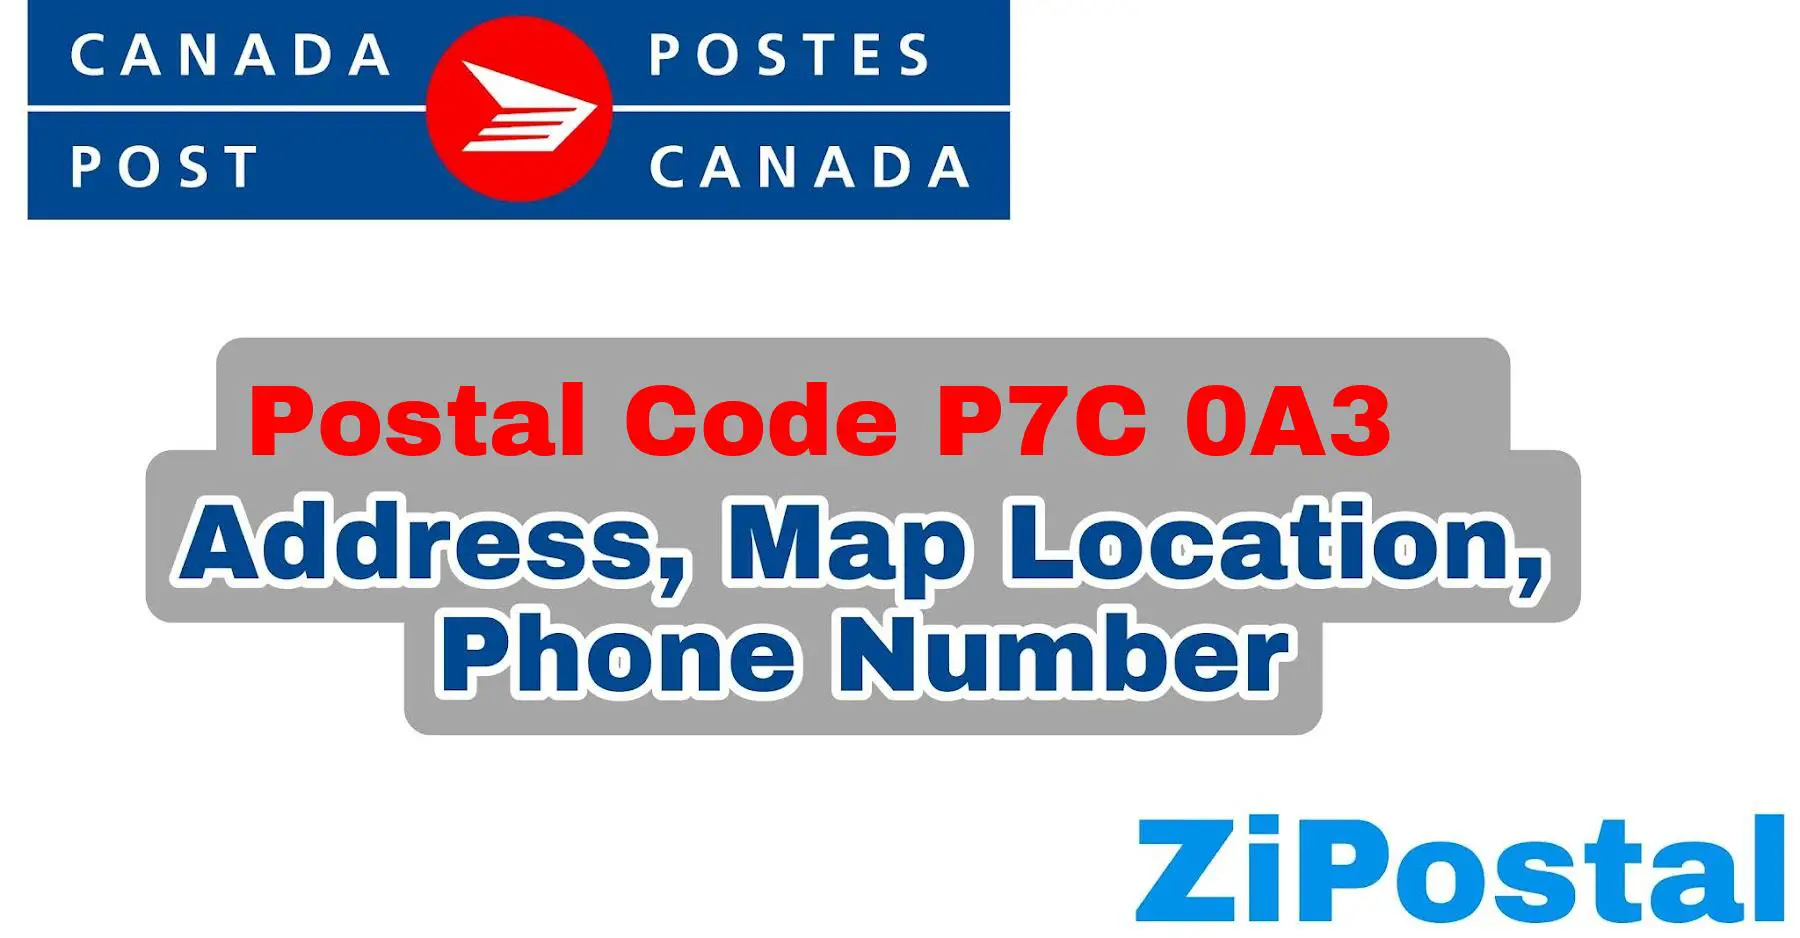 Postal Code P7C 0A3 Address Map Location and Phone Number